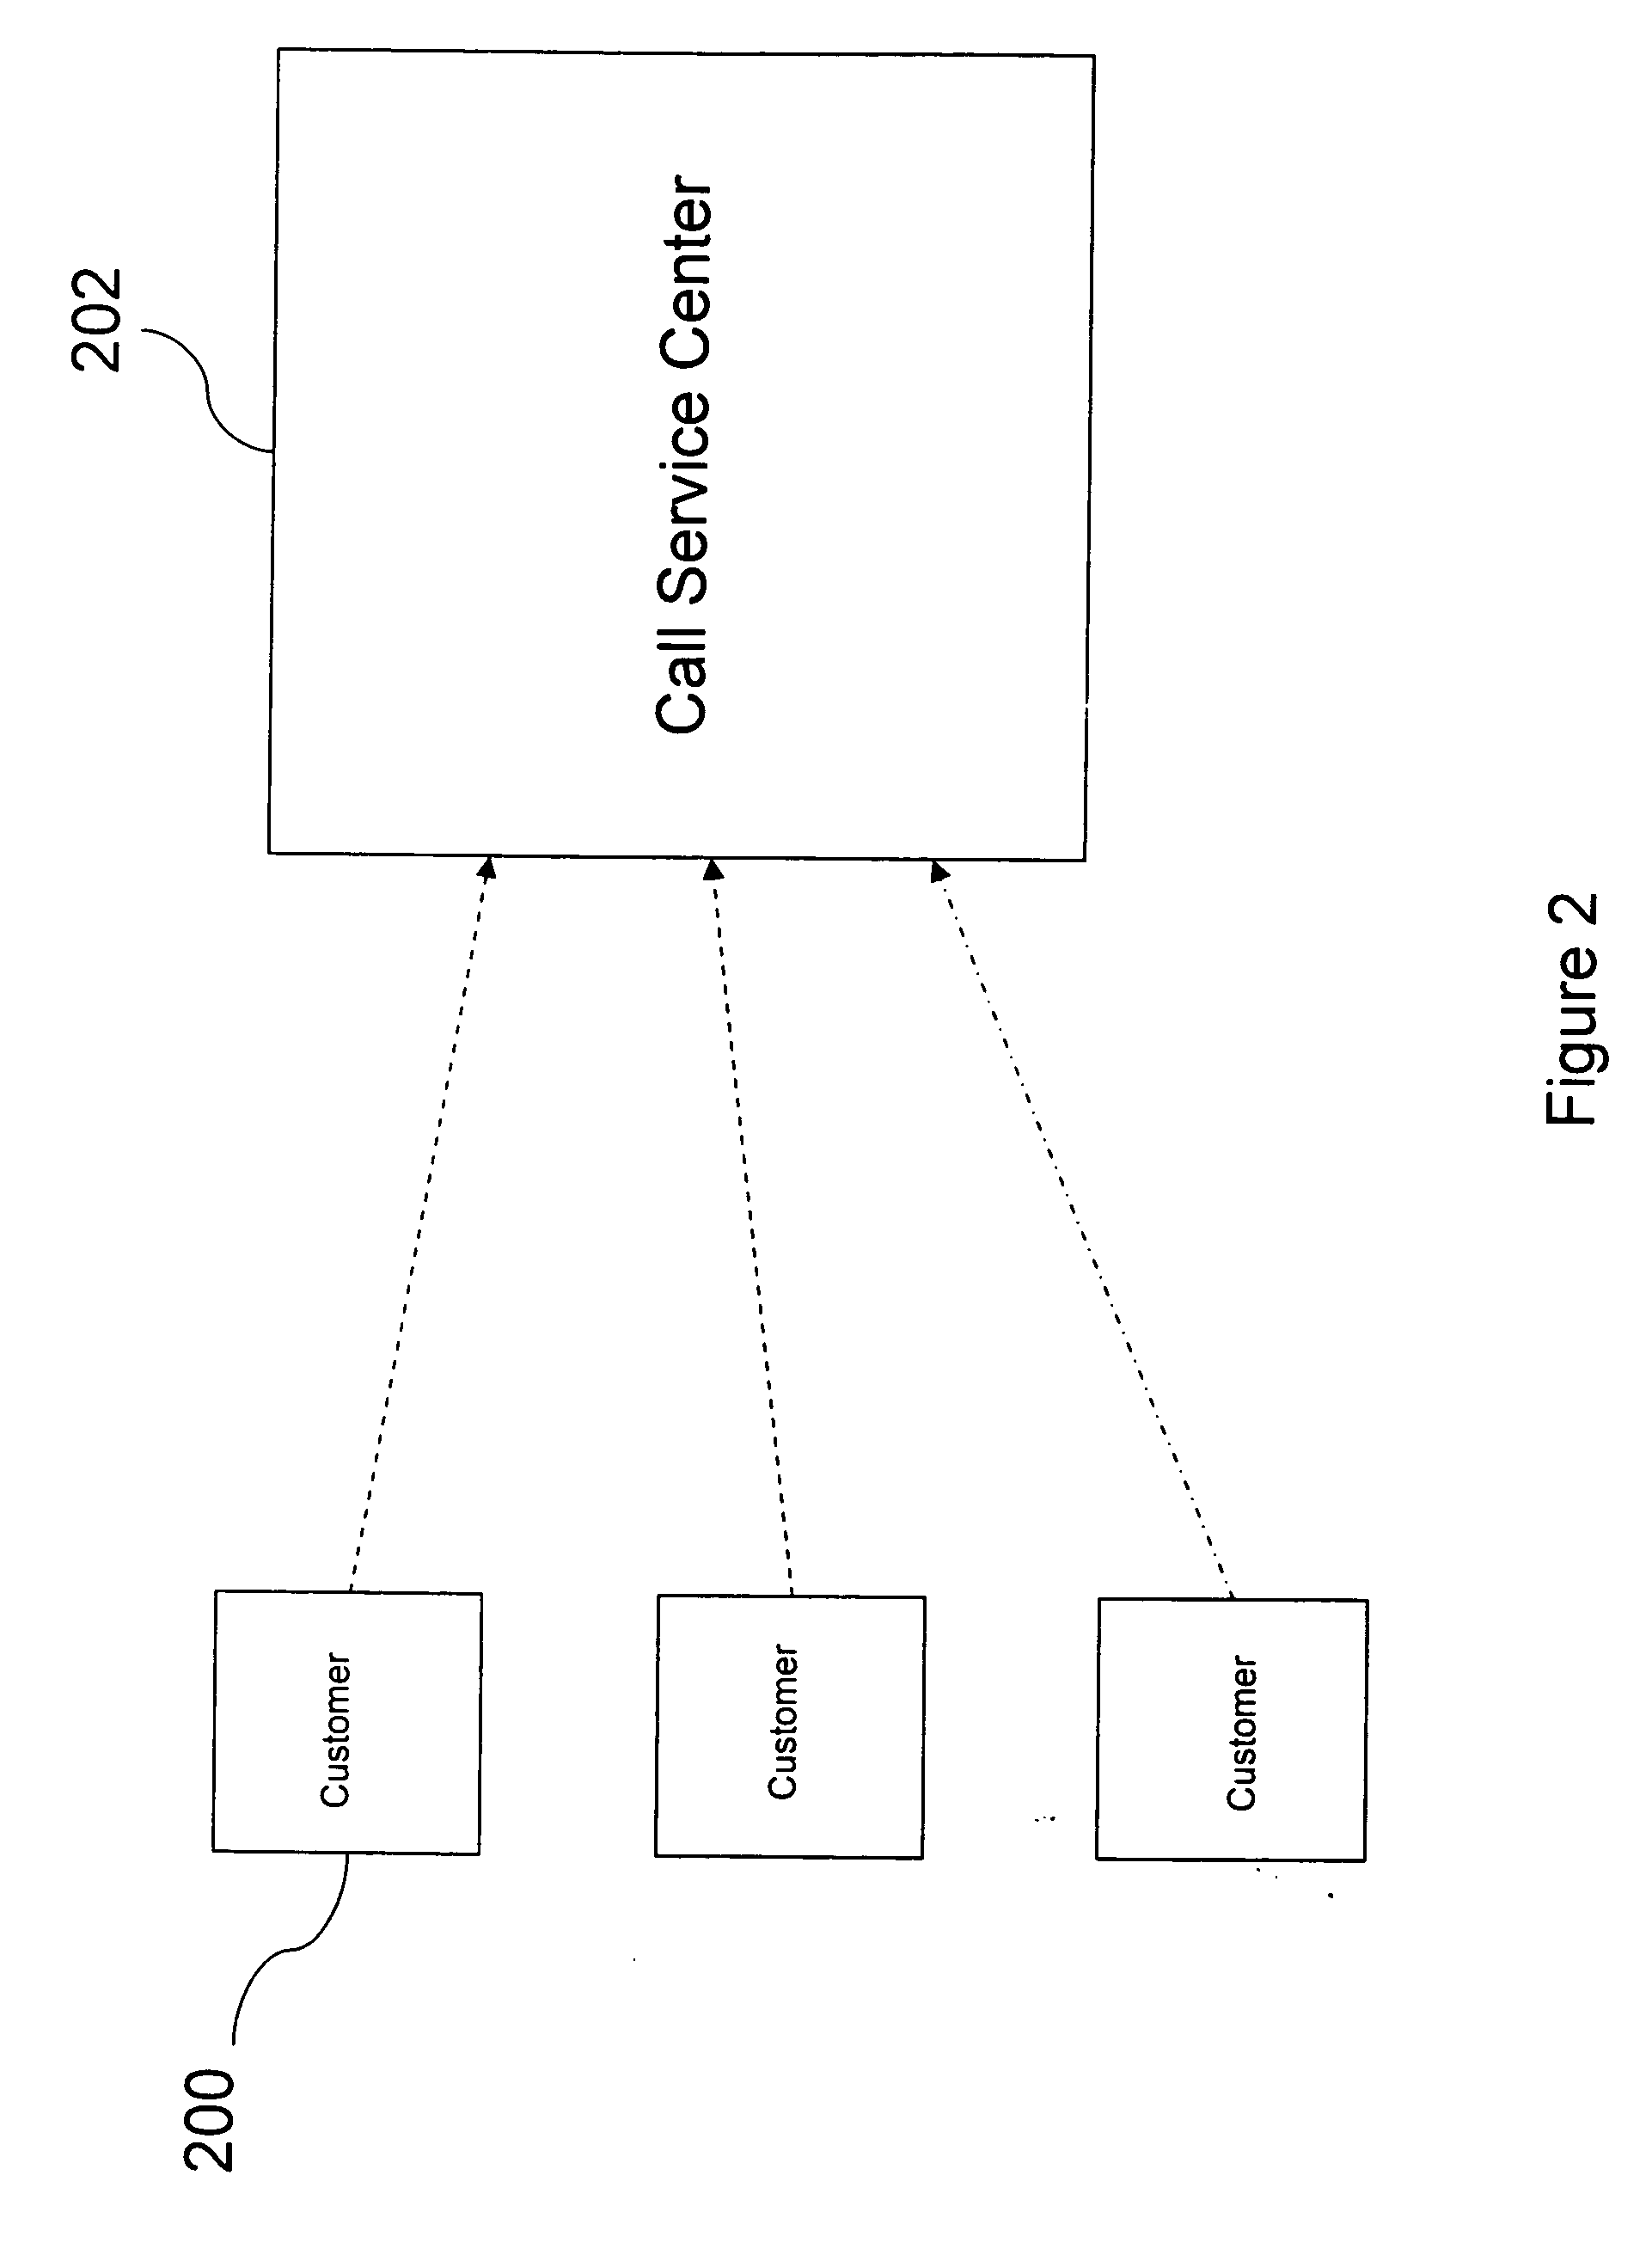 Method and apparatus for providing information about anticipated delays to customers at service centers, contact centers, or call centers